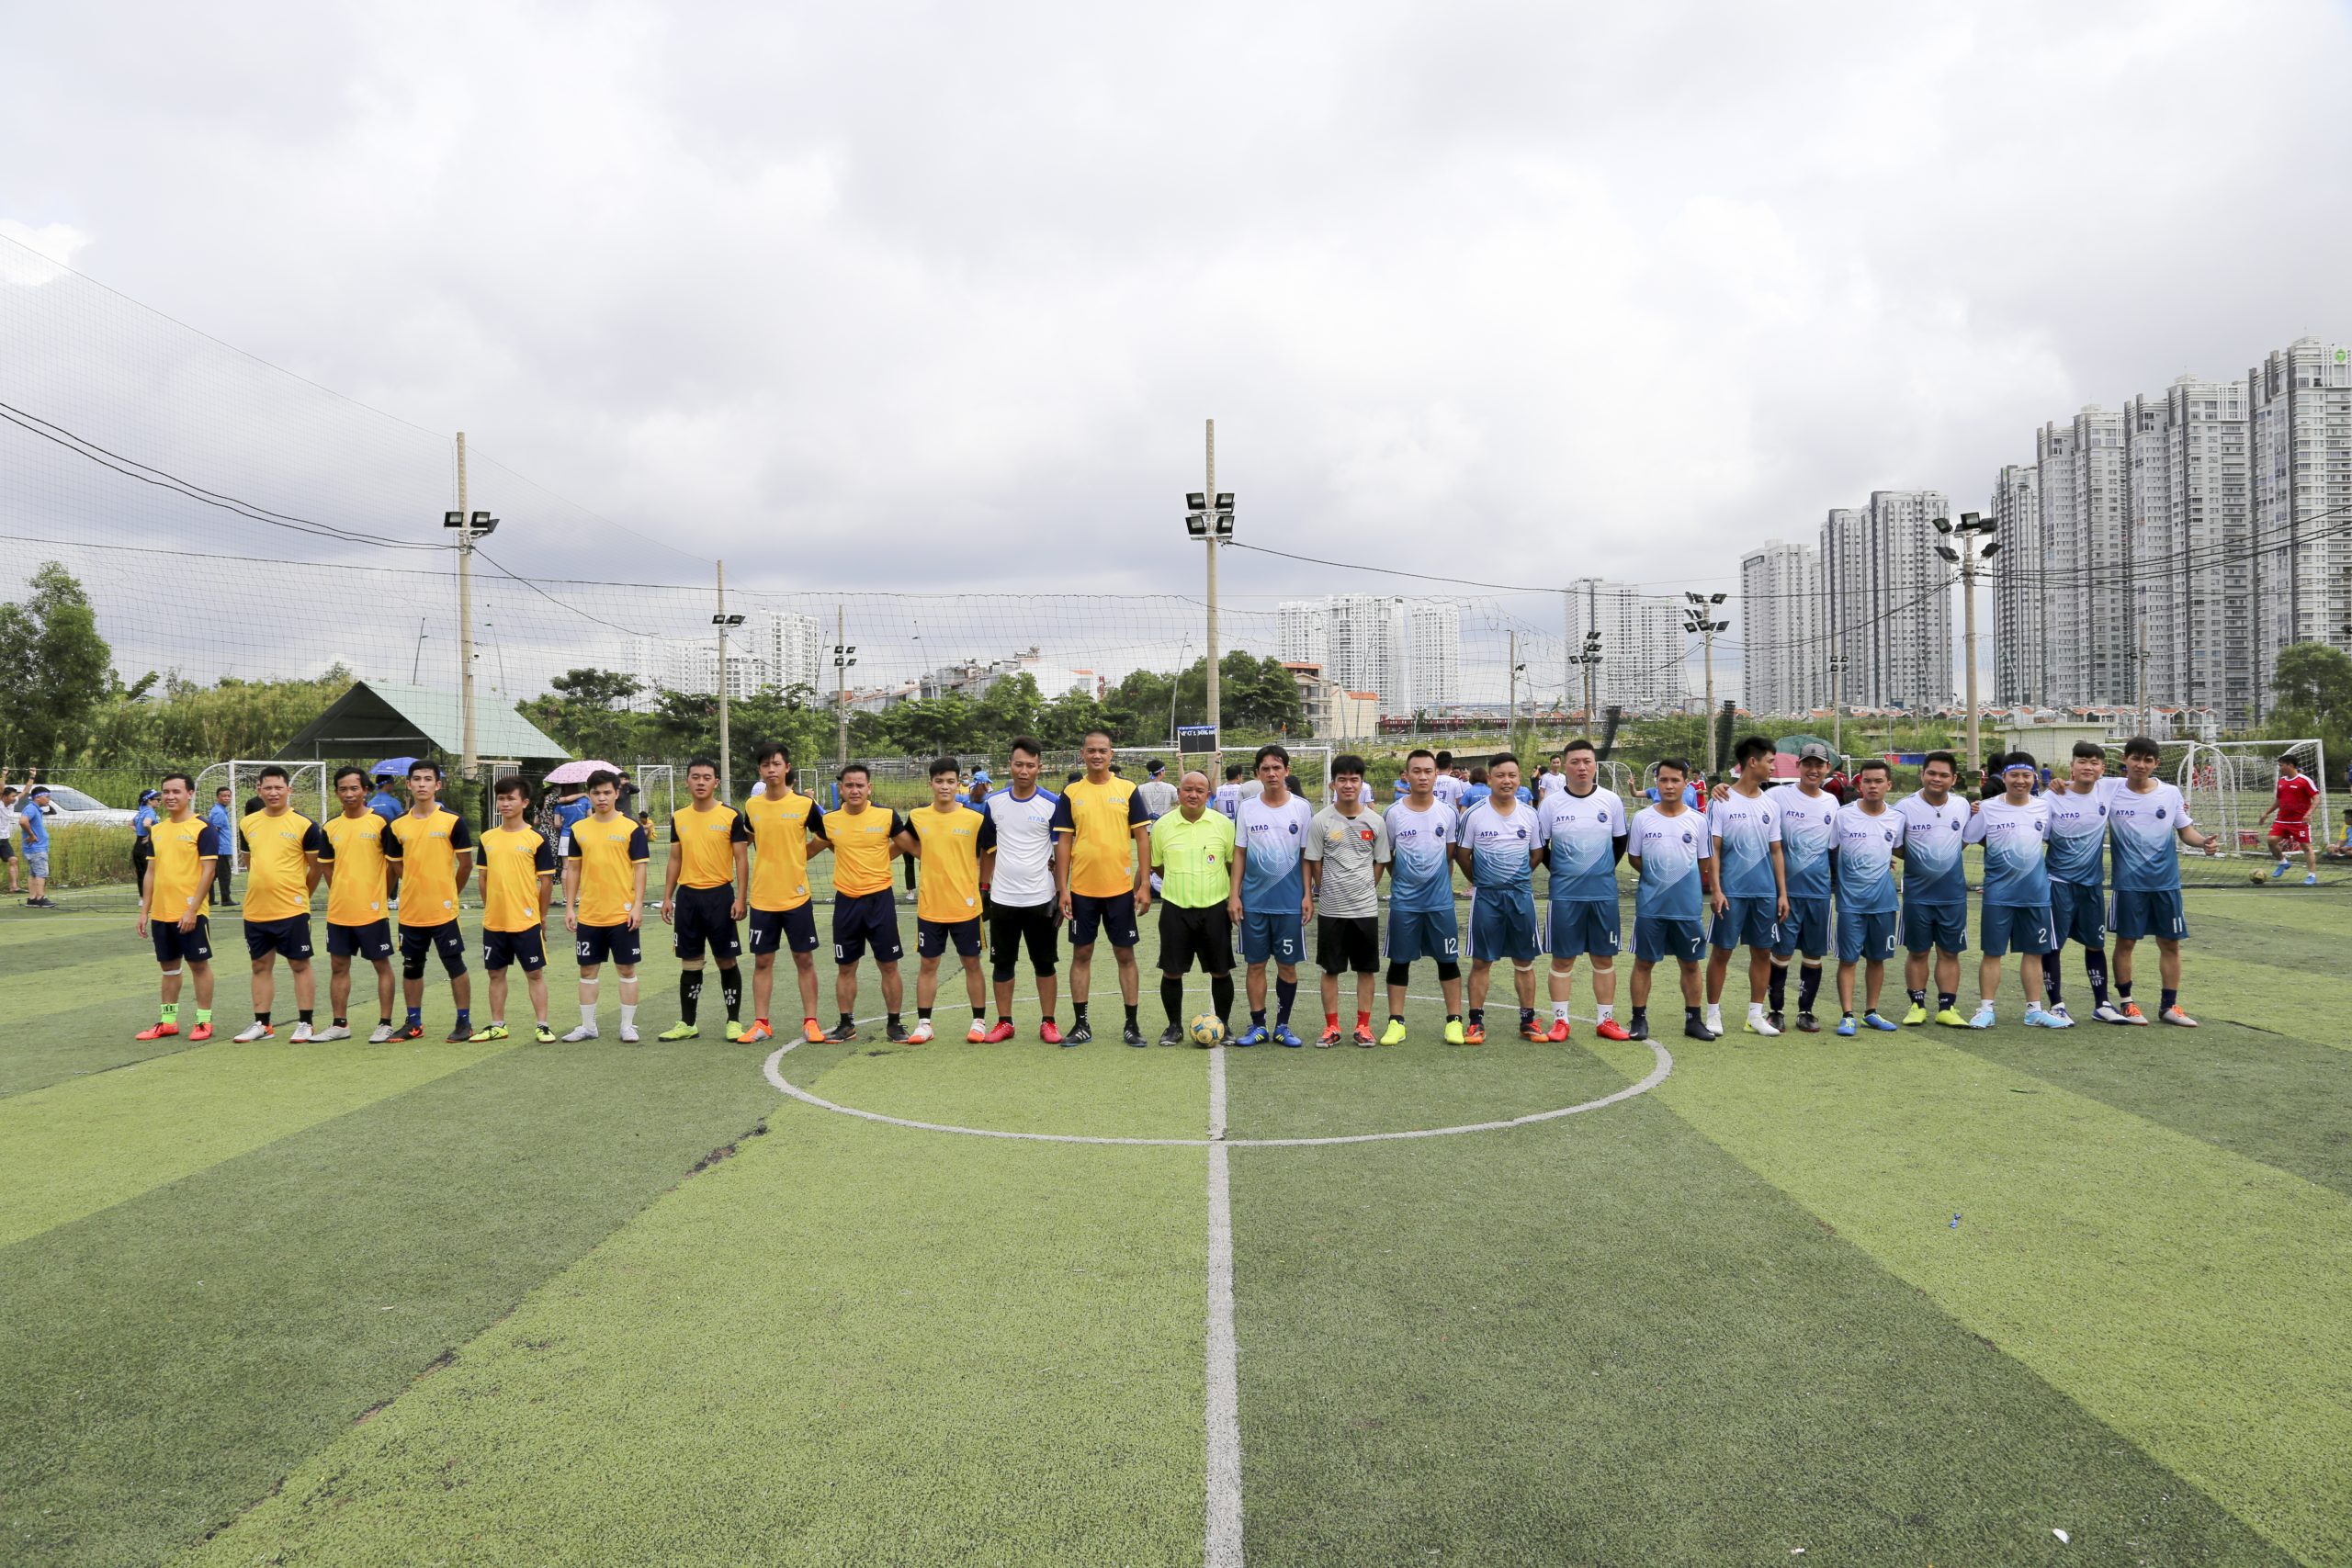 ATAD CUP 2020 football tournament to welcome Company’s 16th anniversary 